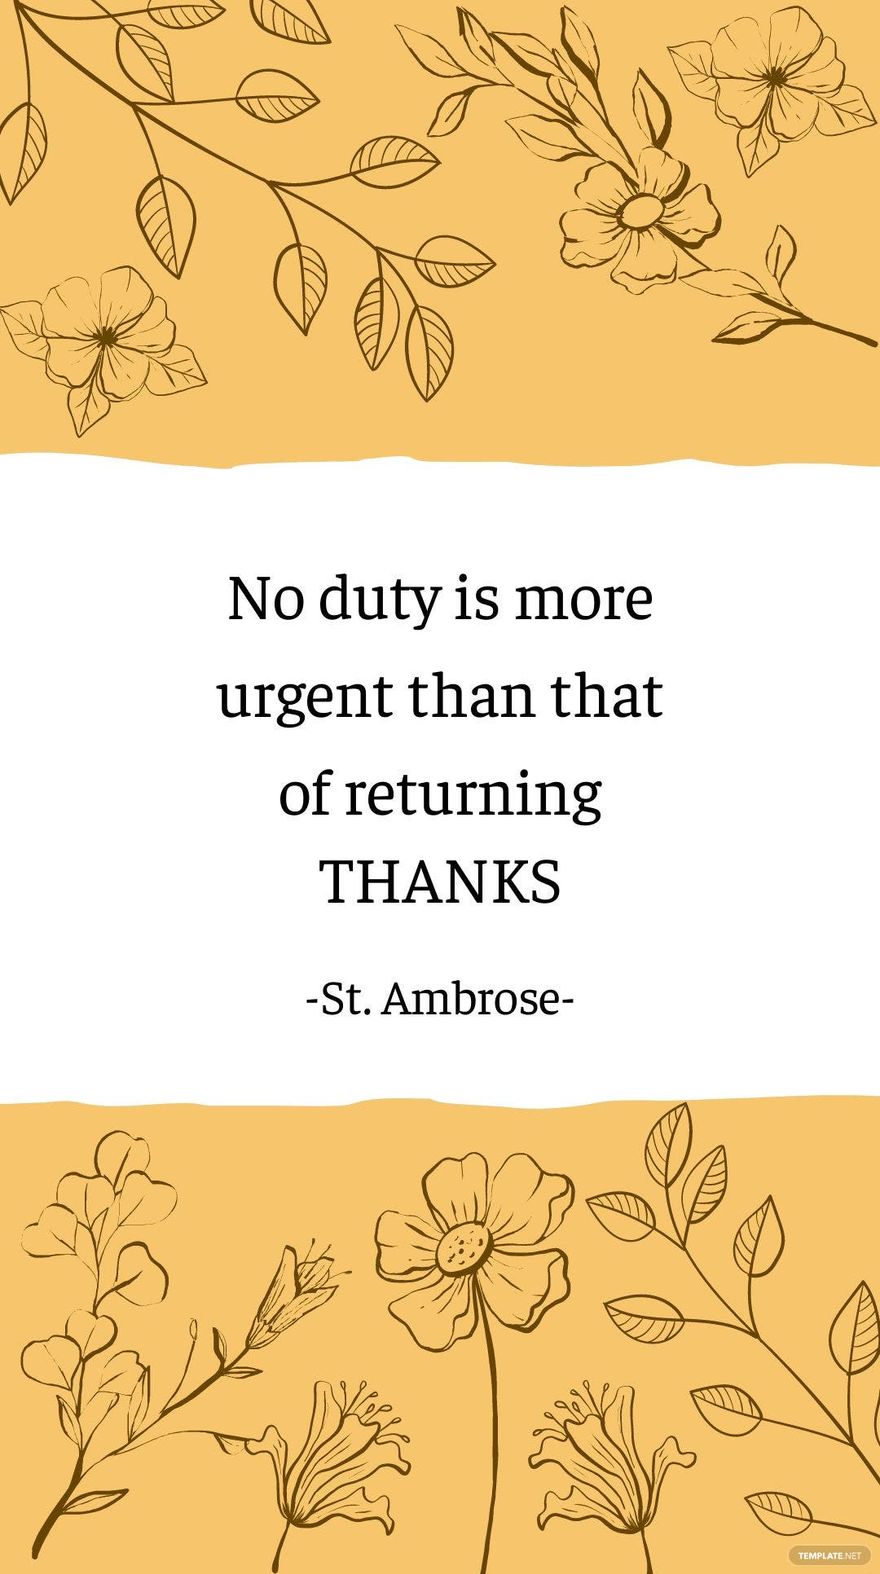 St. Ambrose - No duty is more urgent than that of returning thanks in JPG